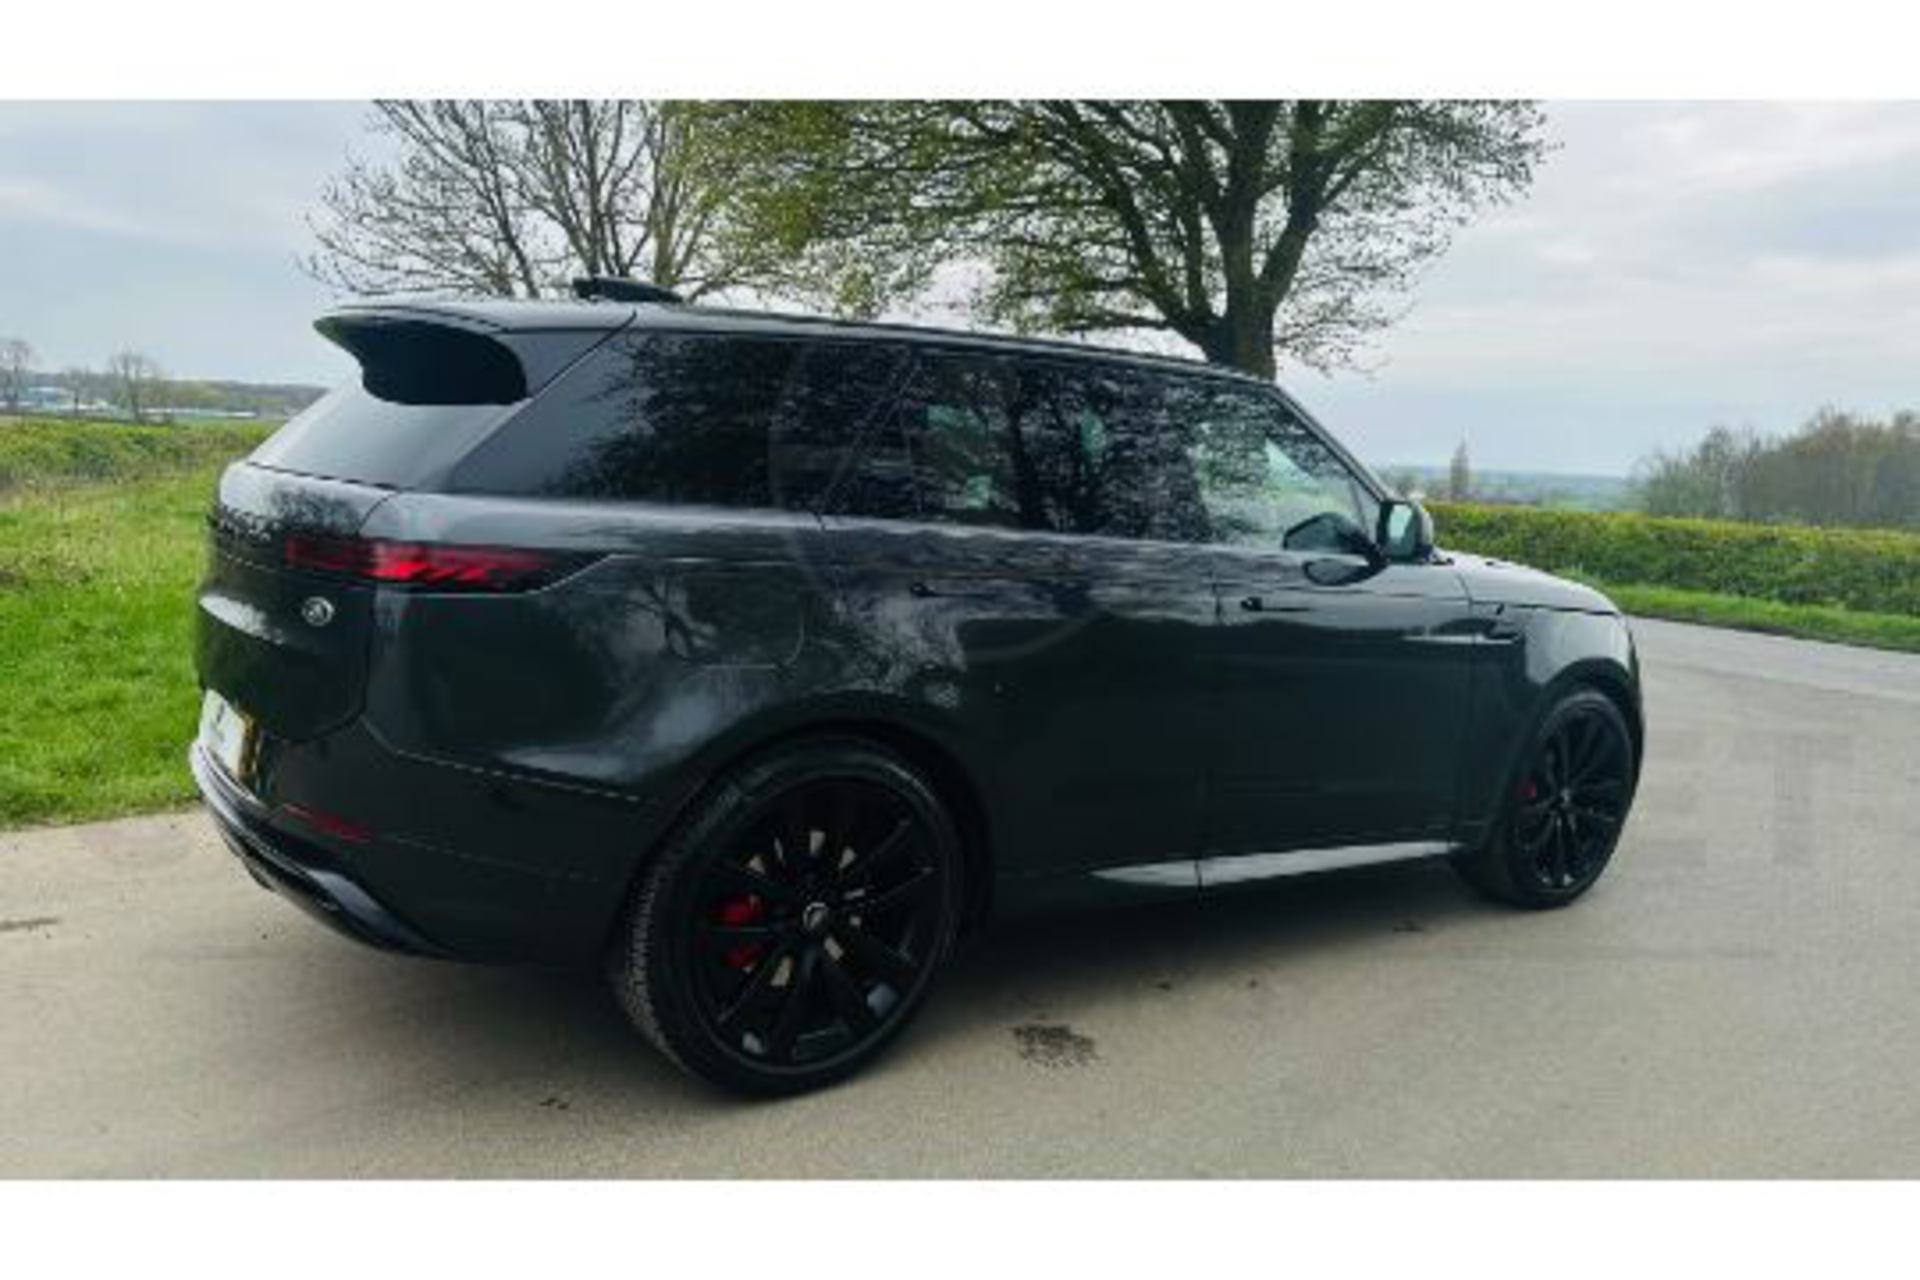 RANGE ROVER SPORT "AUTOBIOGRAPHY" D300 3.0d MHEV - 23 REG - ONLY 500 MILES - MEGA SPECIFICATION!! - Image 11 of 35